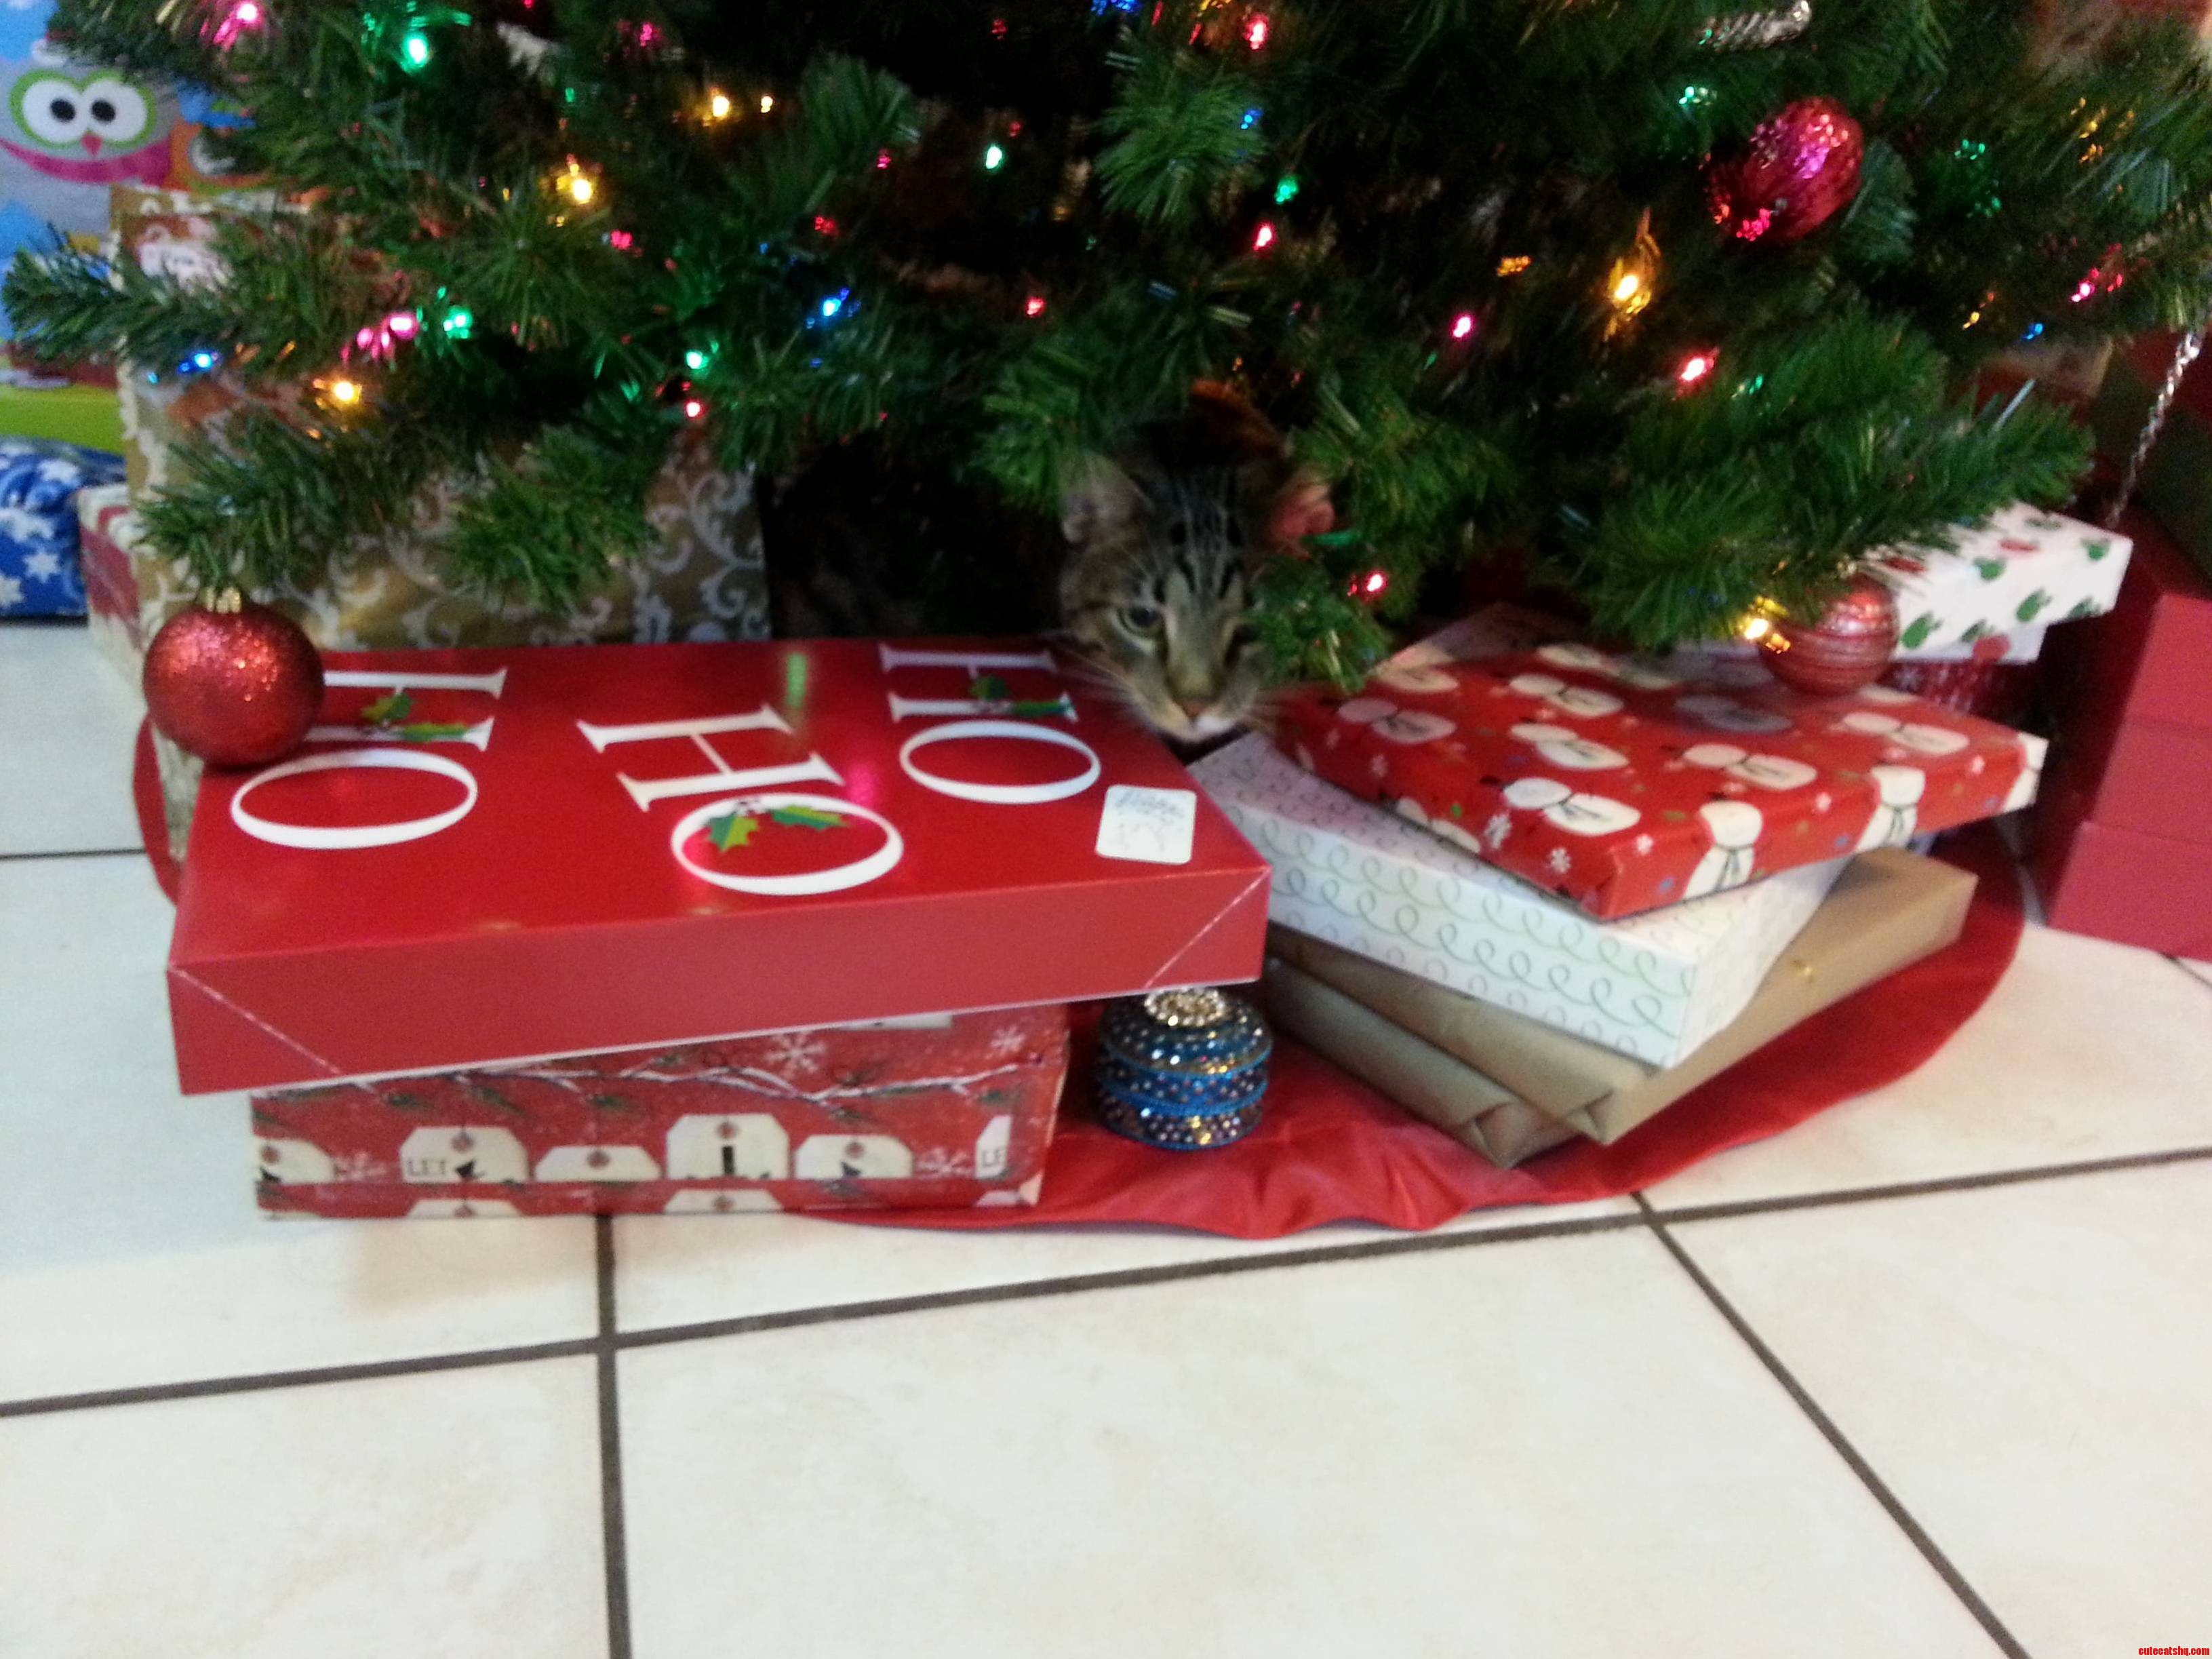 He Thinks He Is A Present. Patiently Sitting To Be Unwrapped.